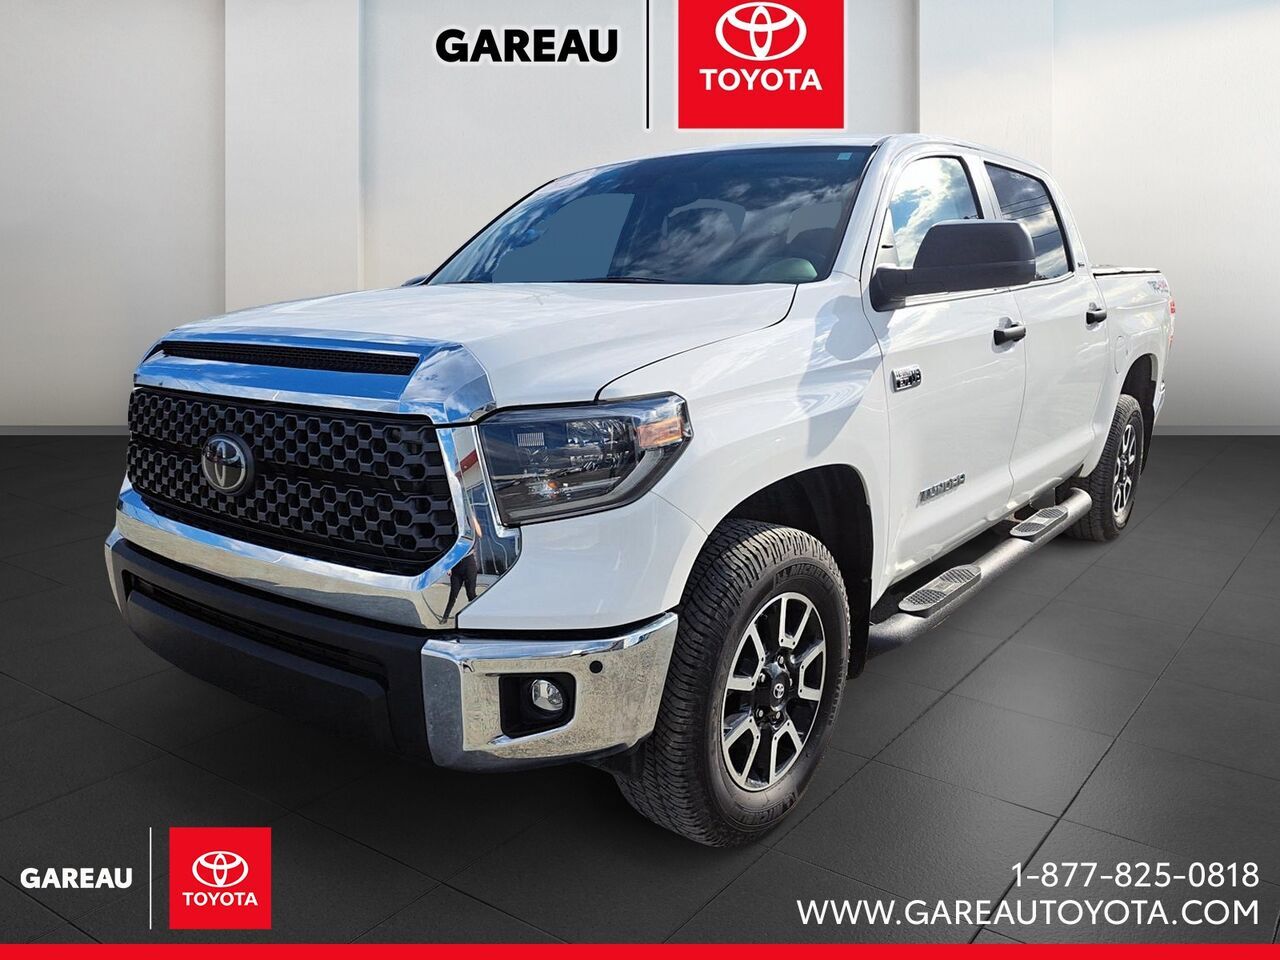 2021 Toyota Tundra crewmax trd toit ouvrant